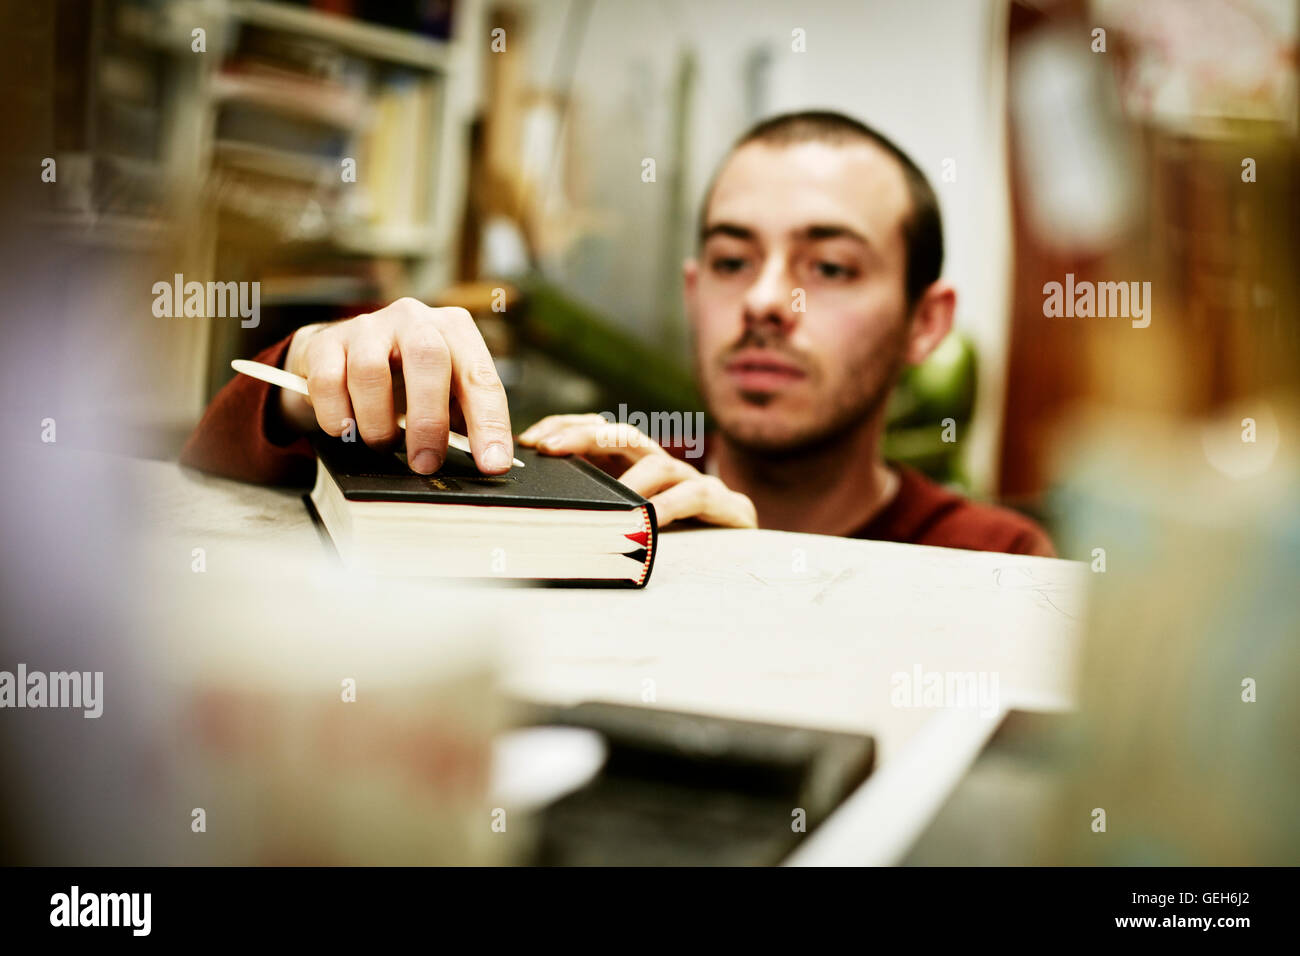 A man using a hand tool on the cover of a book. Stock Photo